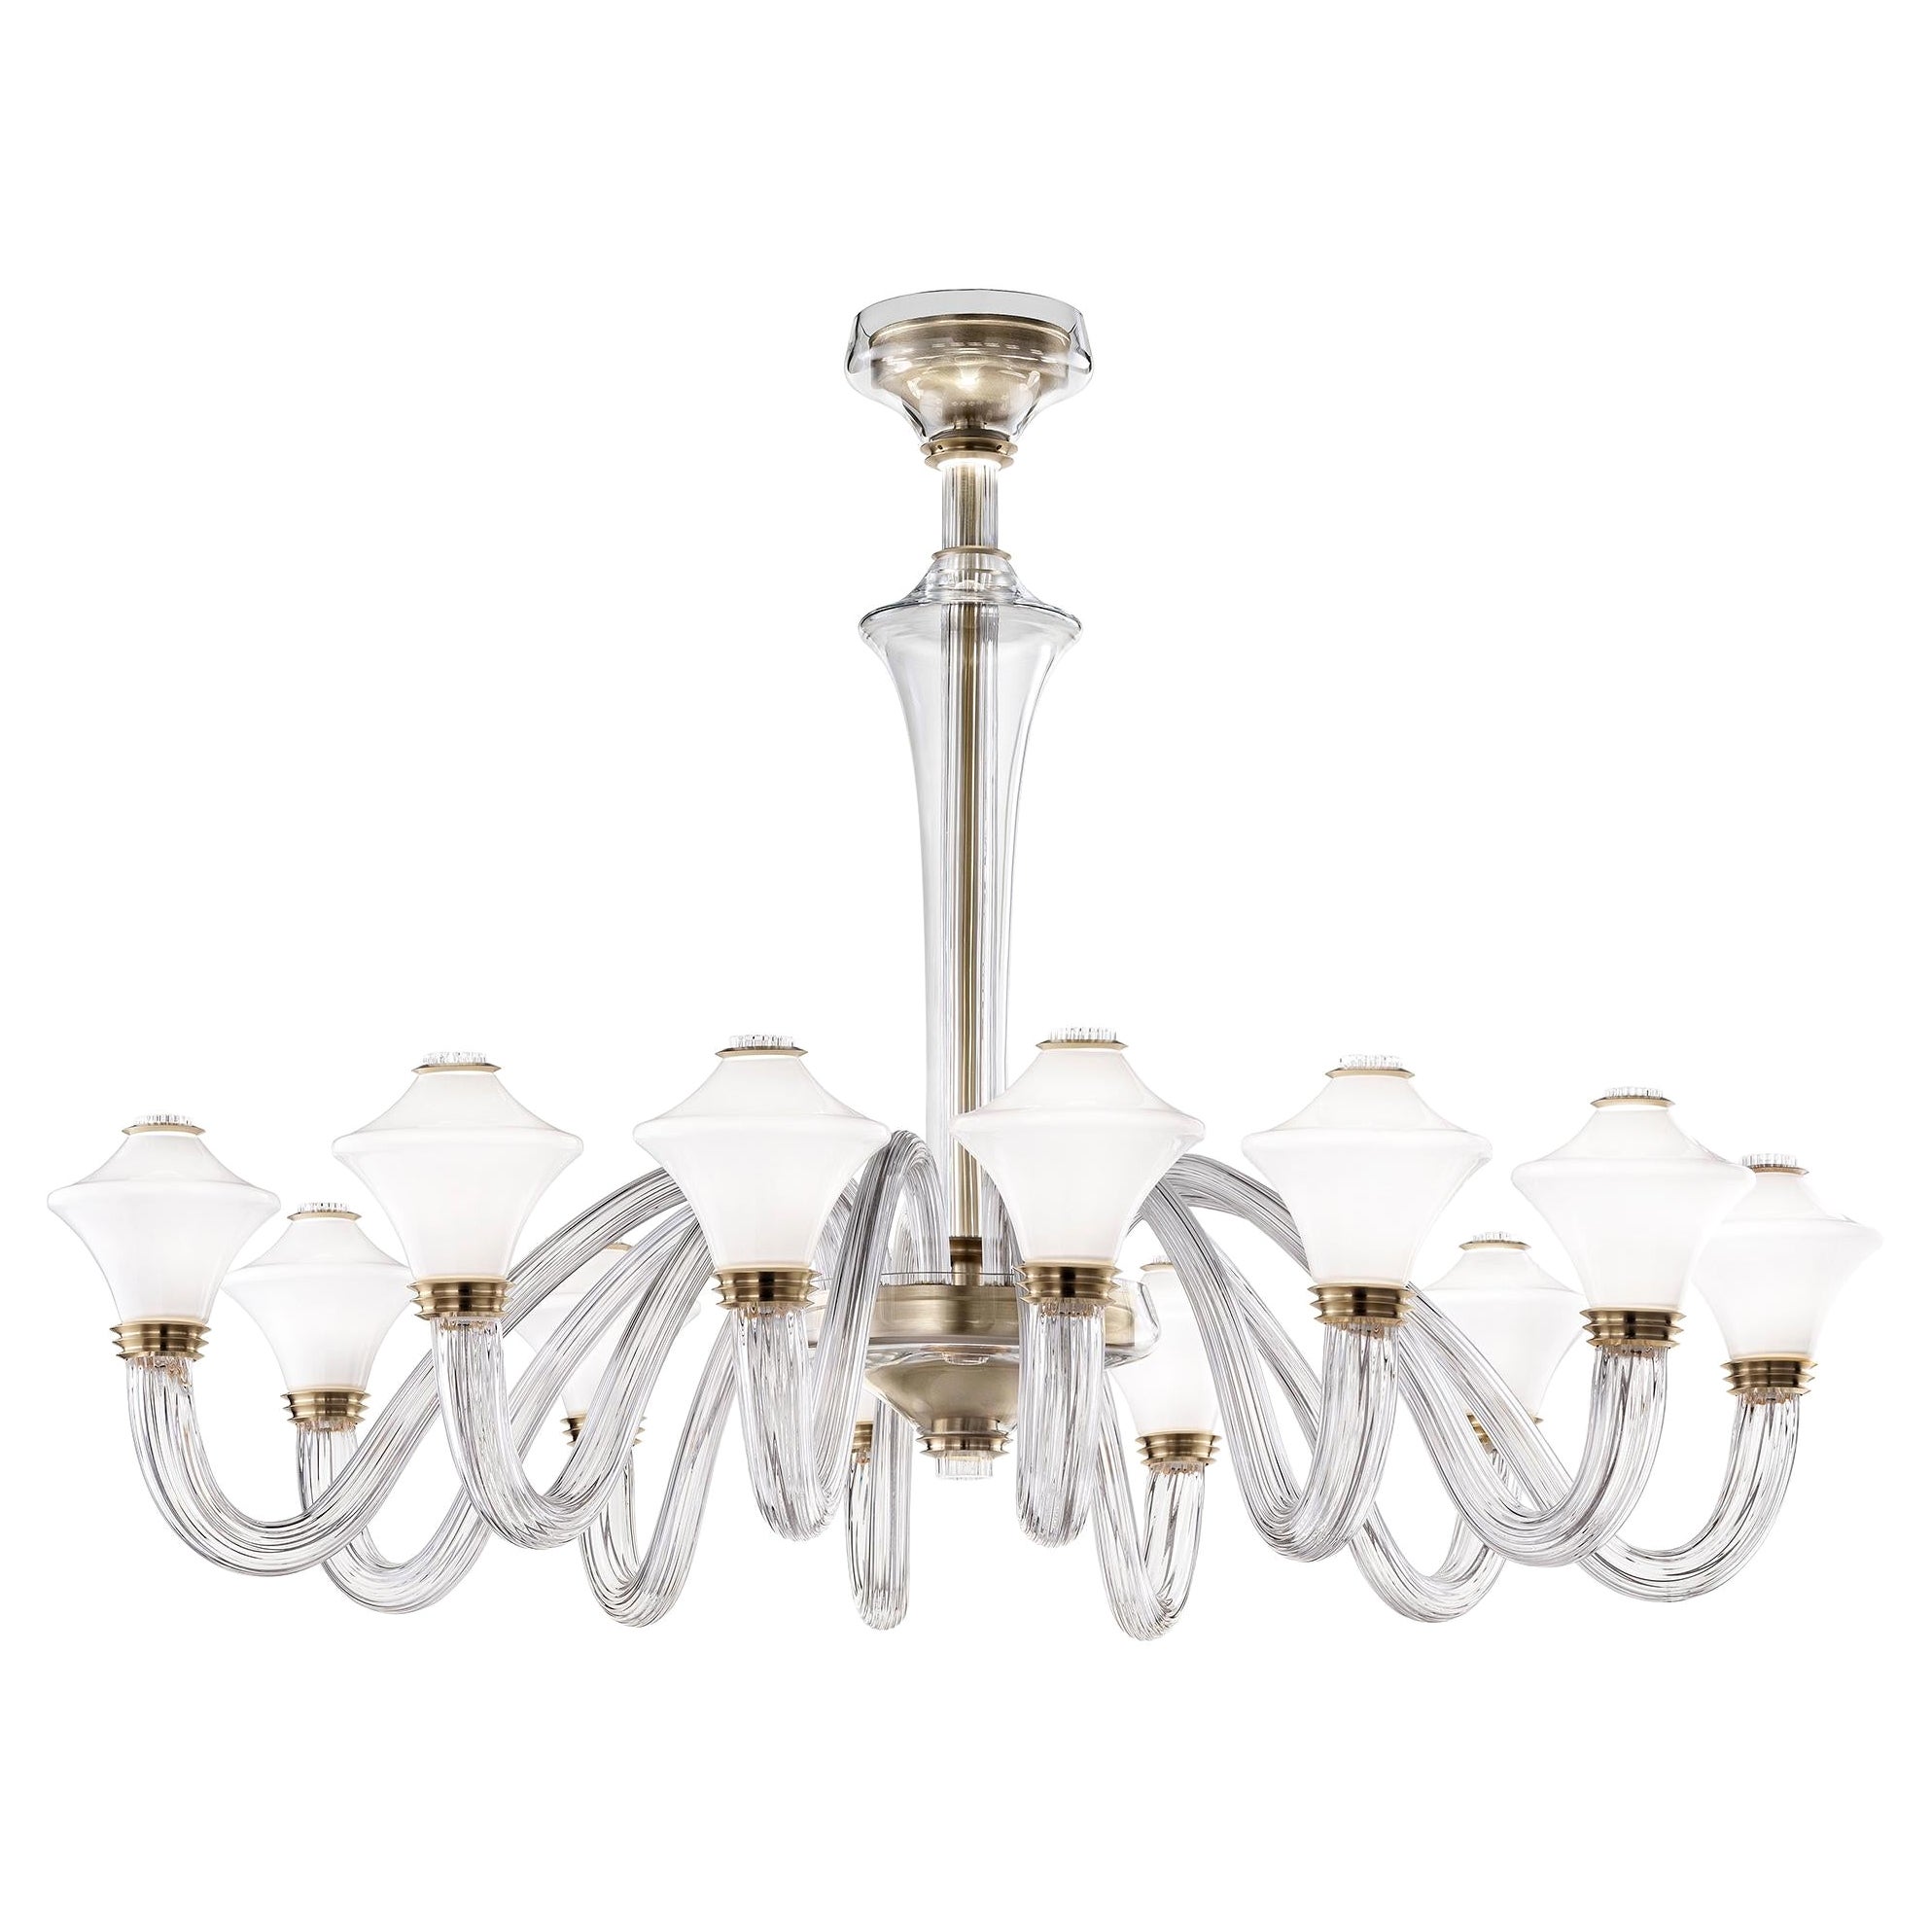 Barovier&Toso Metropolis 12 Chandelier with Crystal Glass & Gold Finish